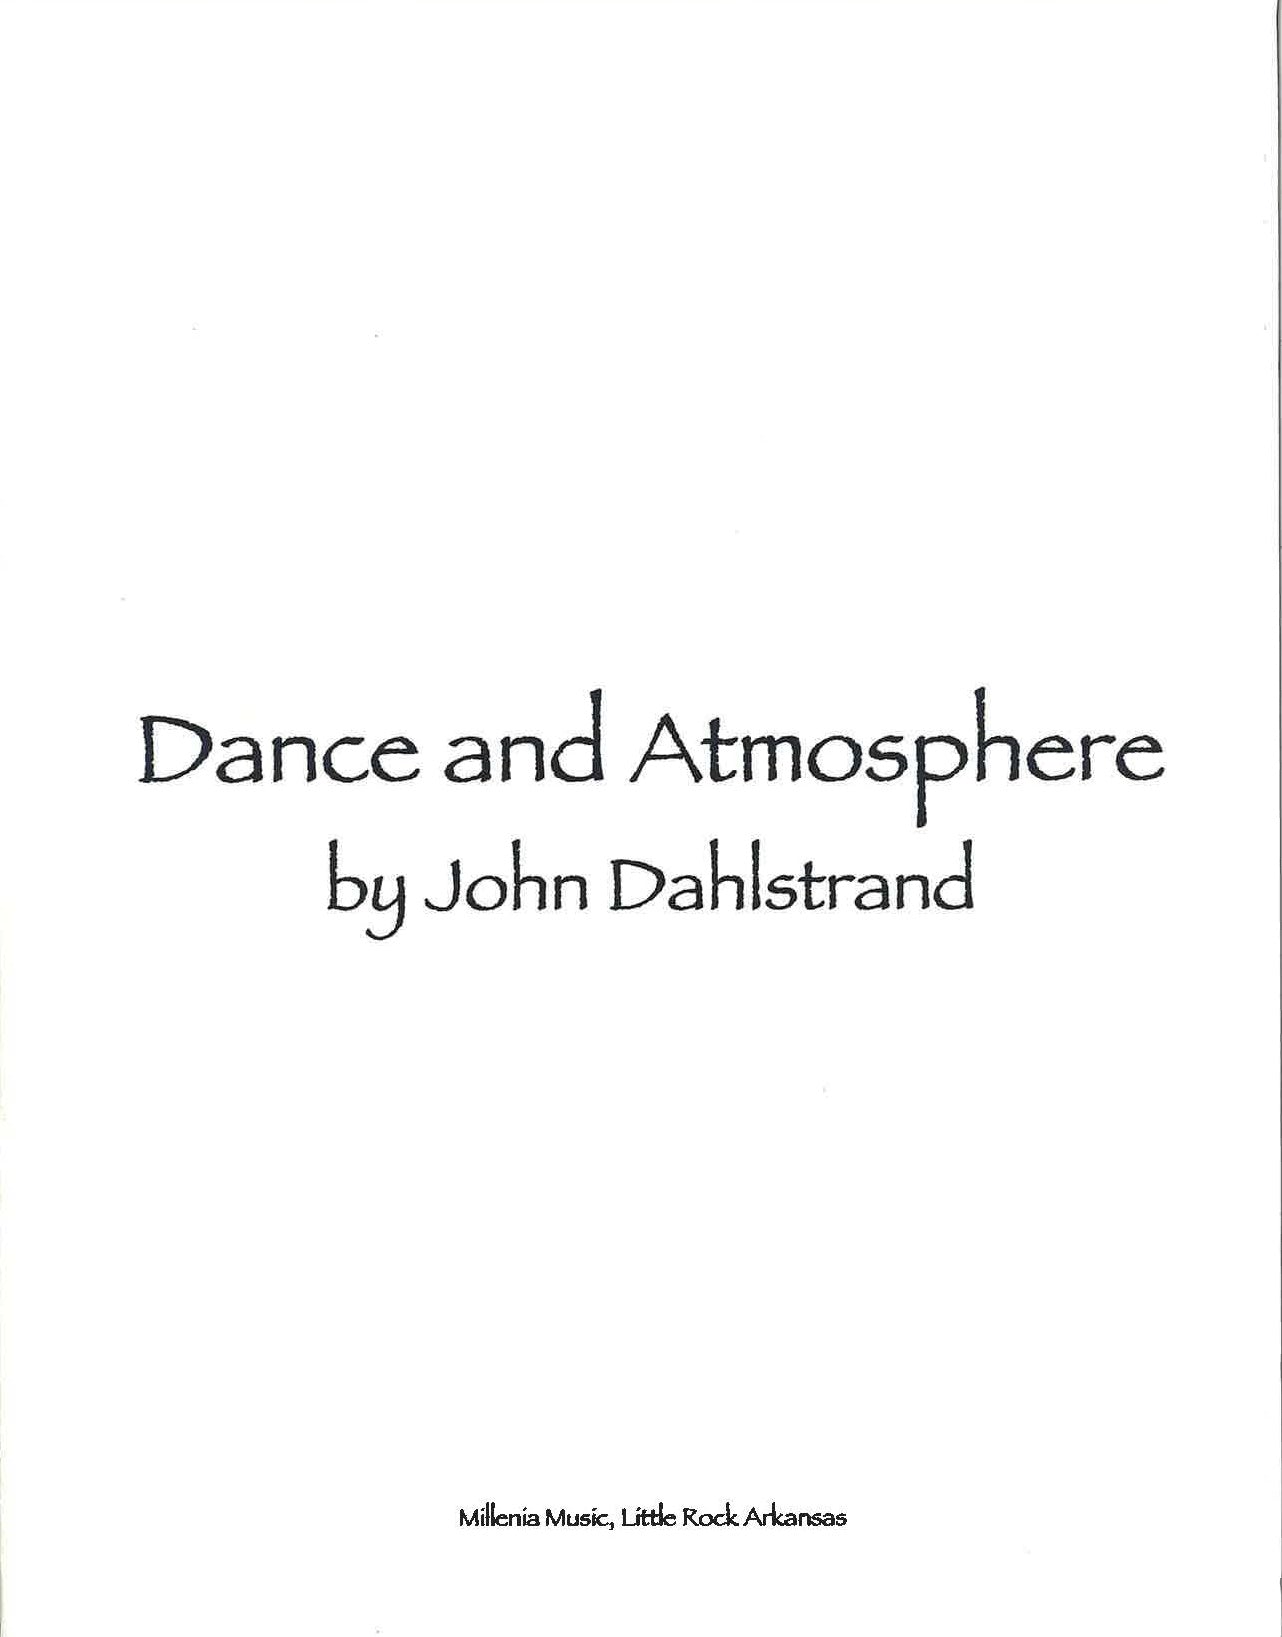 Dahlstrand: Dance and Atmosphere